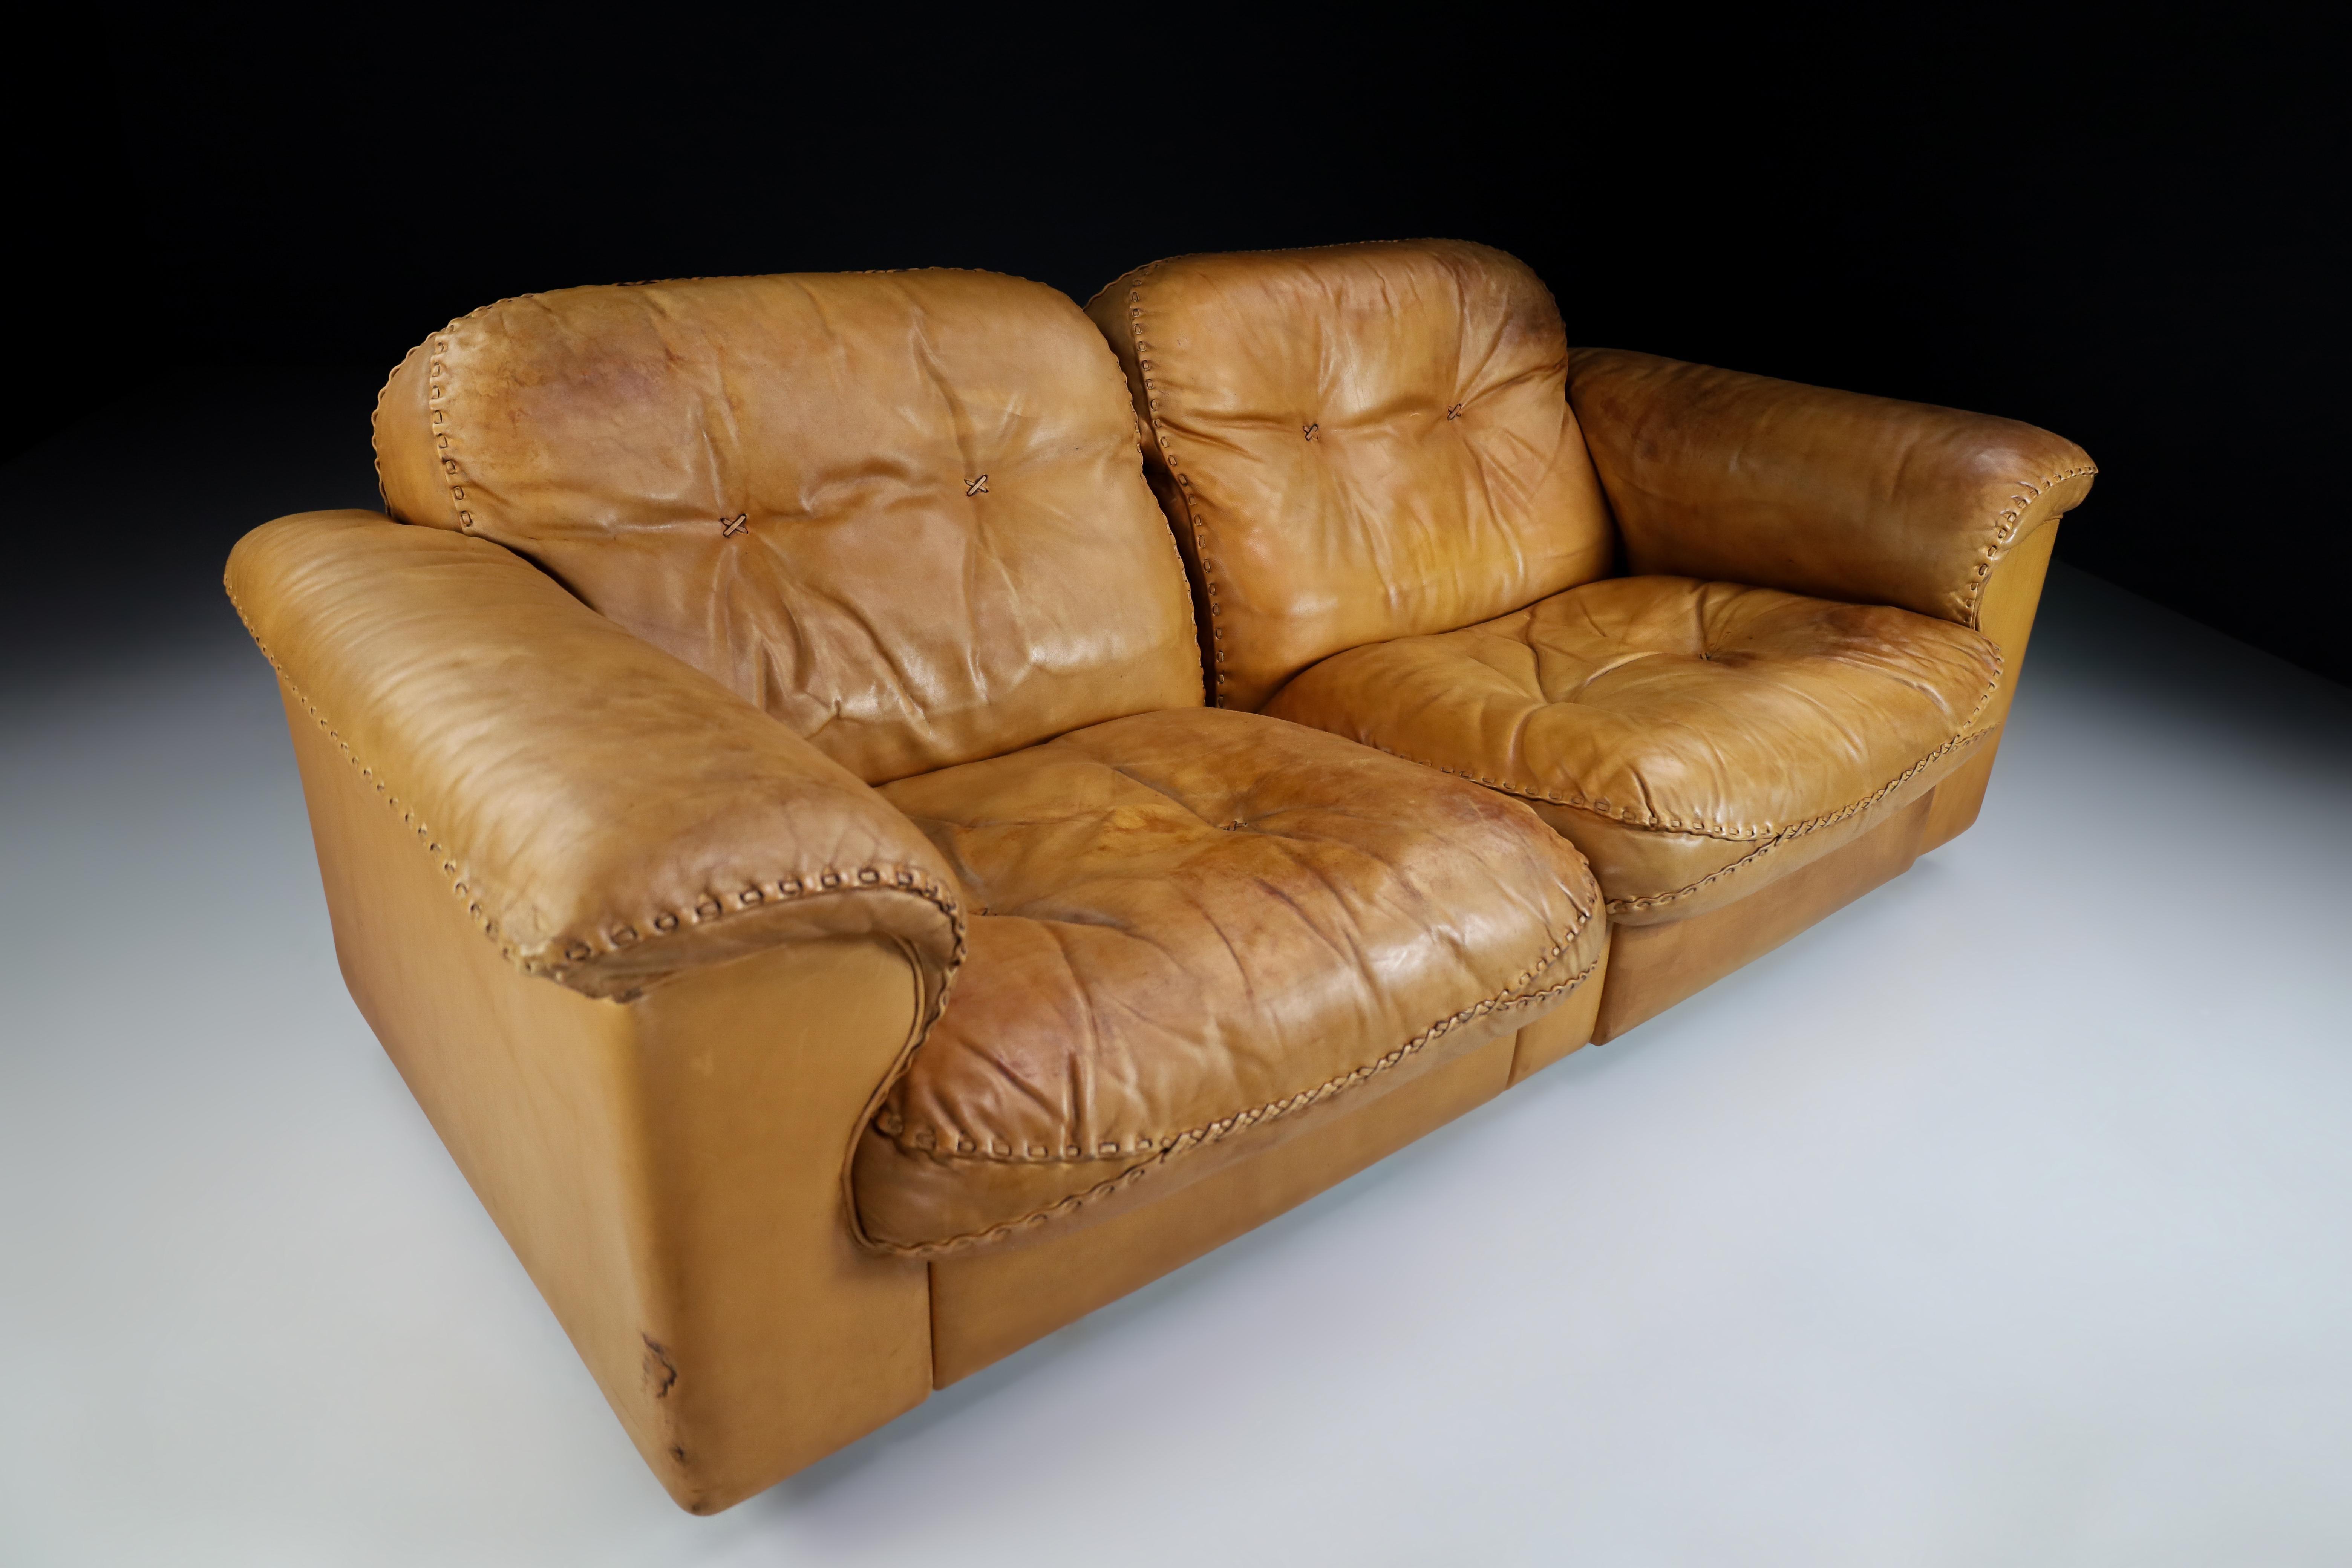 Robust Patinated leather De Sede DS-101 two-seater sofa, Zwitserland 1960s

Robust Patinated leather De Sede DS-101 two-seater sofa. Outstanding comfort with an extendable seat for much more lounge comfort and high-quality neck leather. The frame